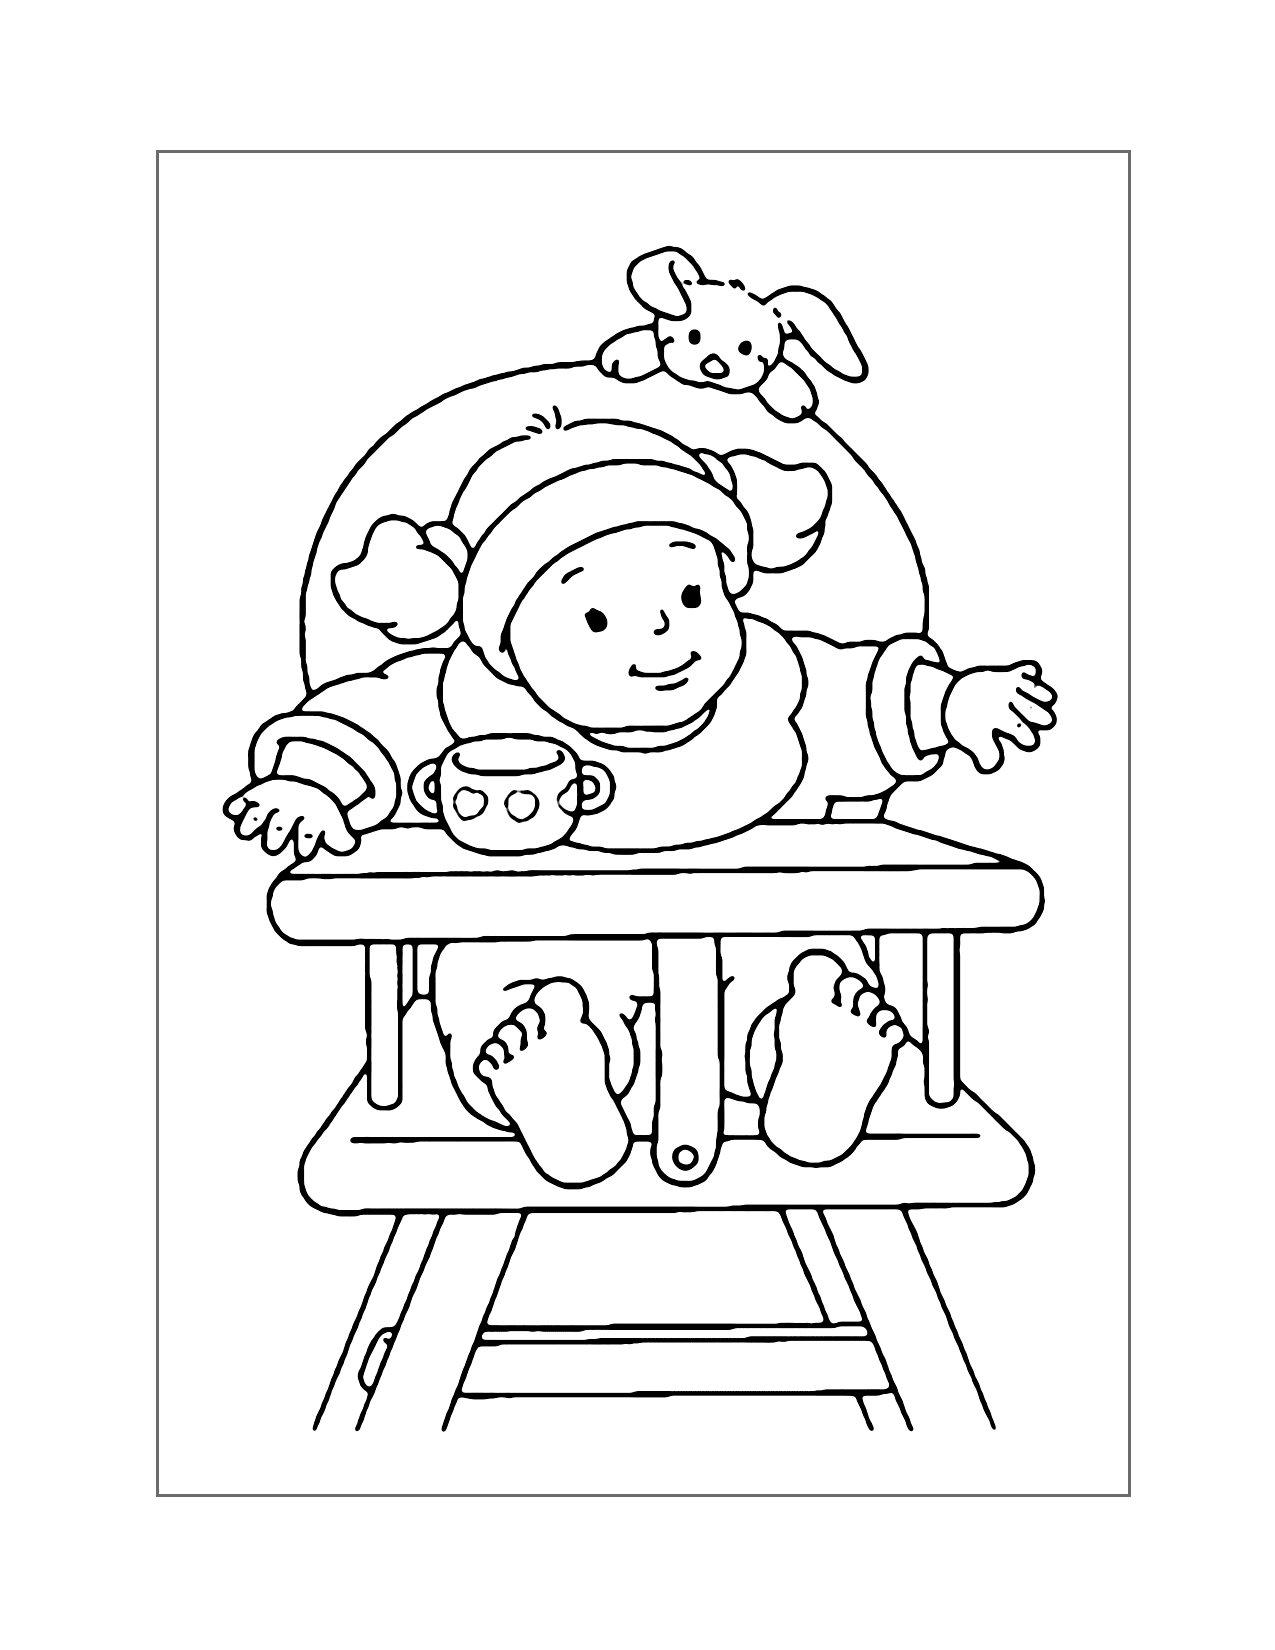 Baby In High Chair Coloring Page